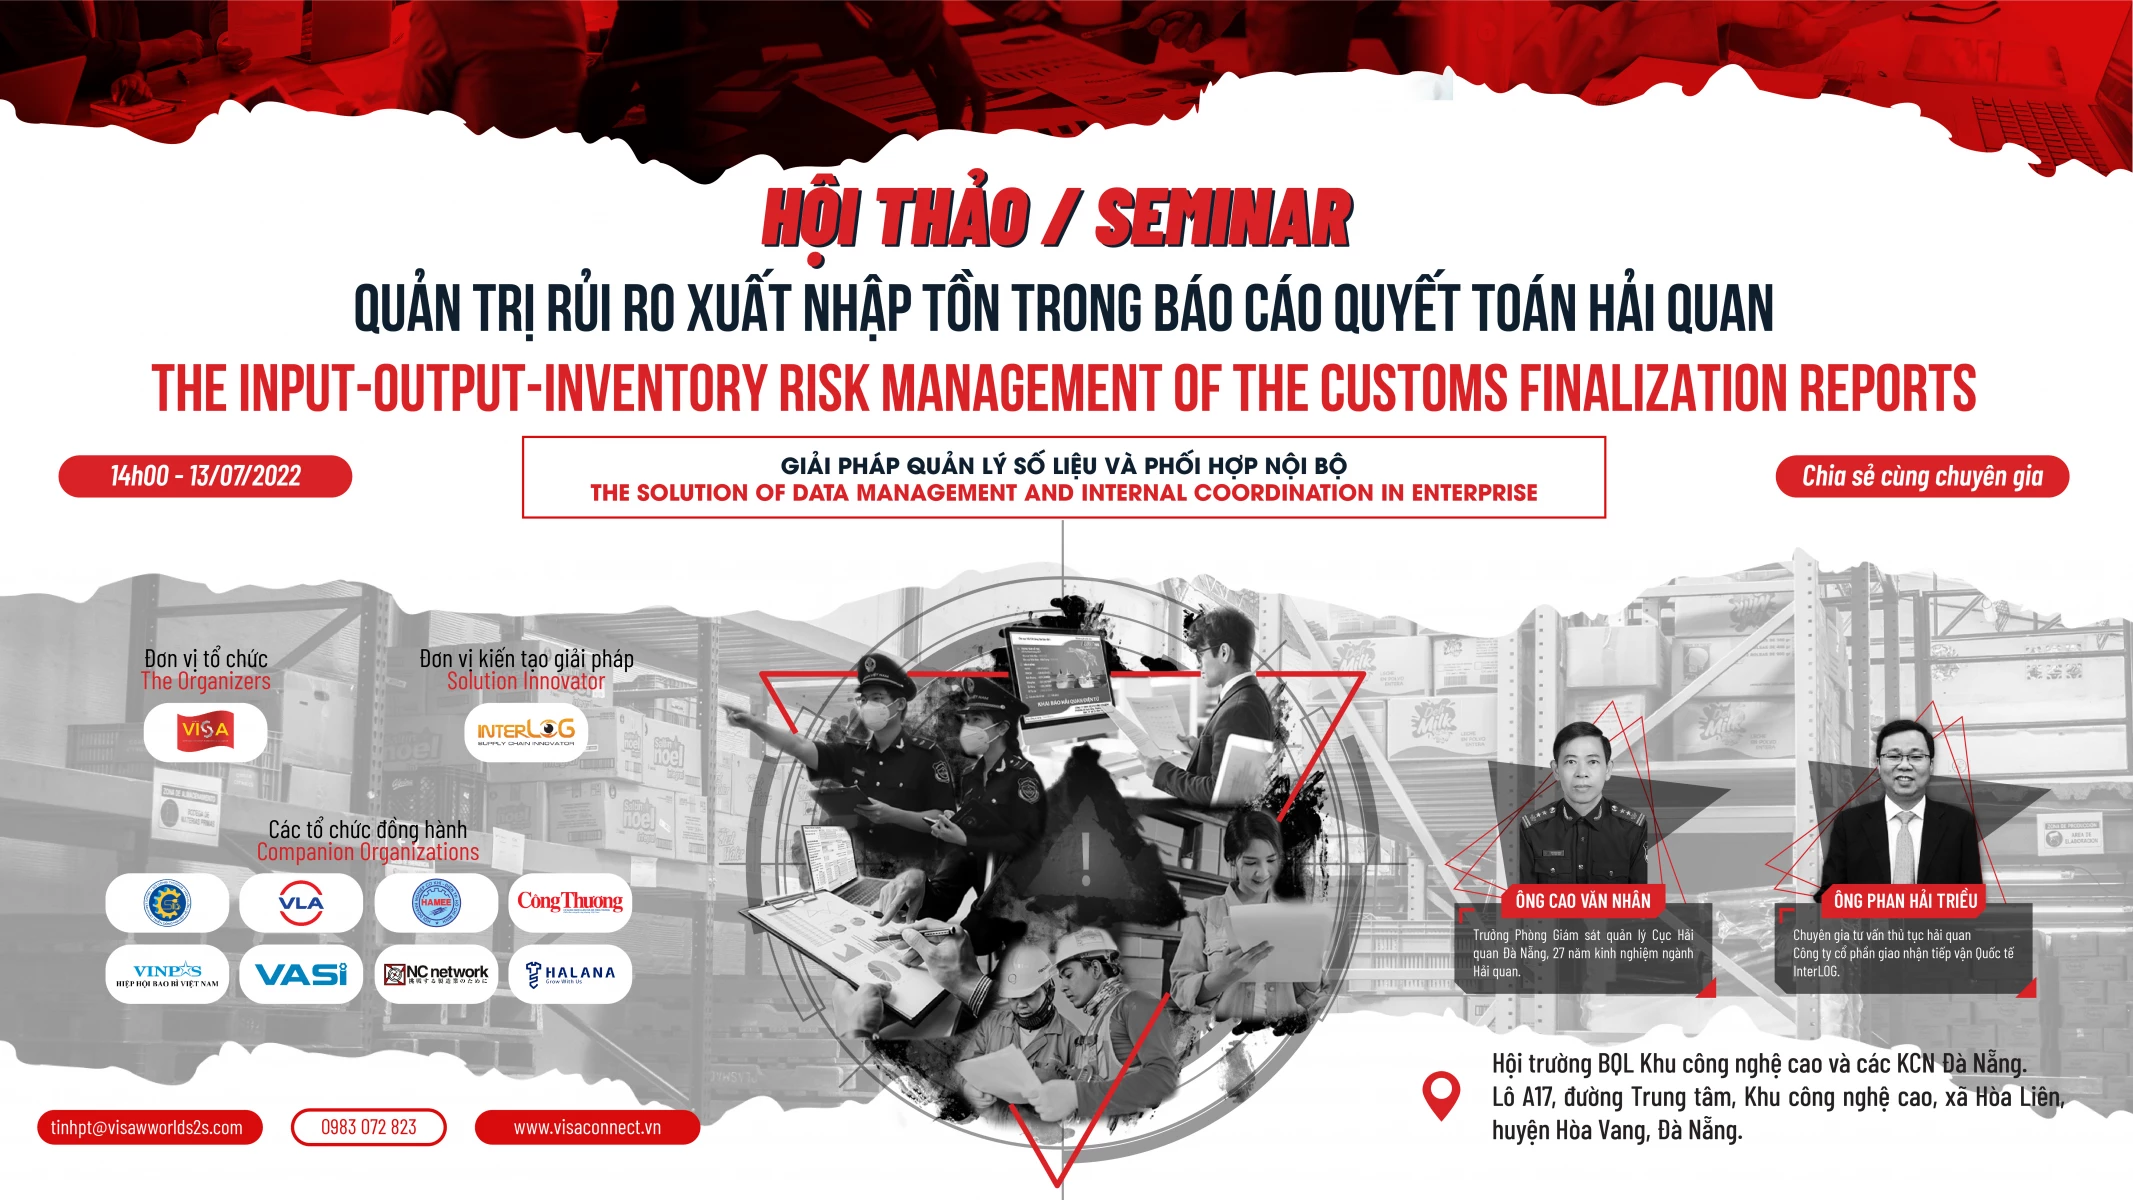 Invitation To Attend The Seminar On The Input-Output – Inventory Risk Management Of The Customs Finalization Reports – The Solution Of Data Management And Internal Coordination In Enterprise